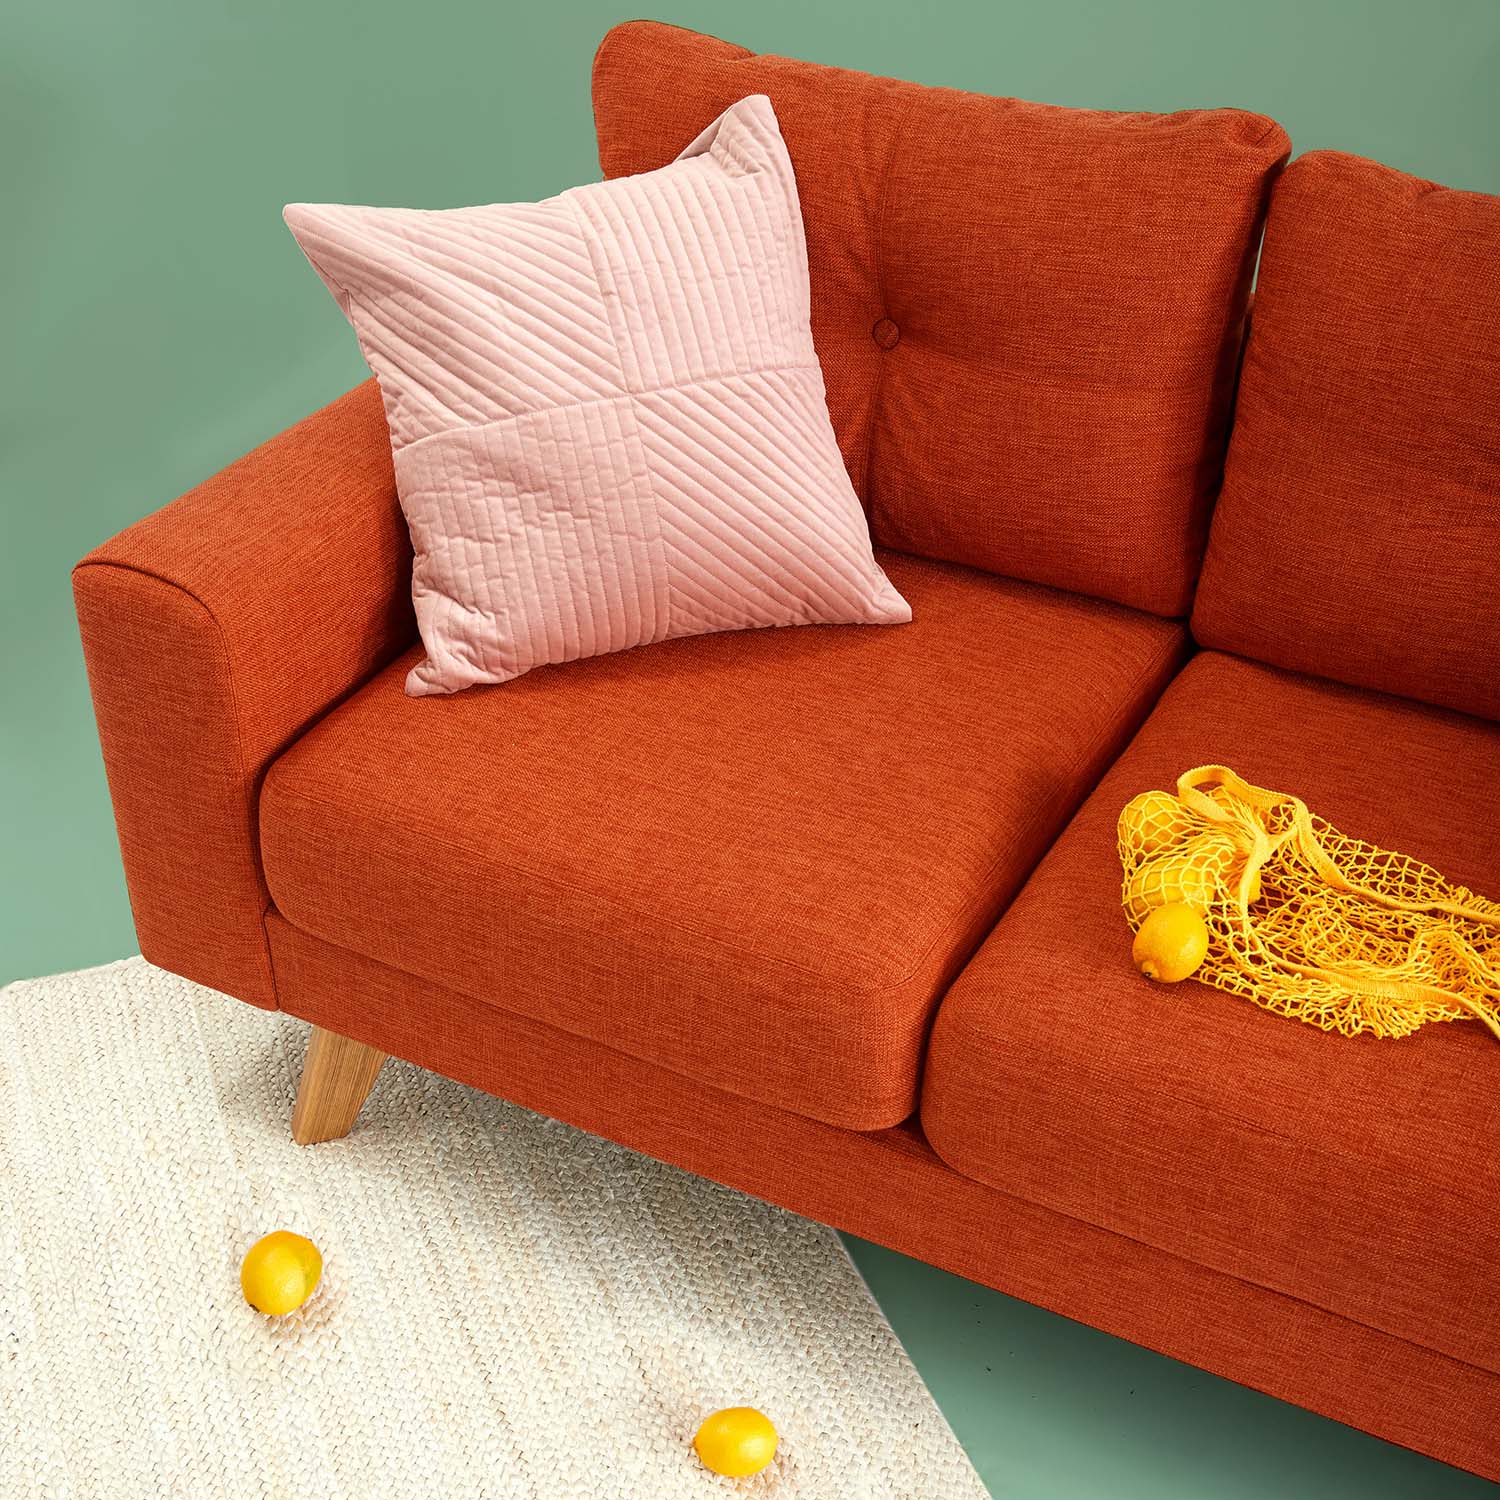 What to Look for in a Sofa? Top Tips From Industry Professionals